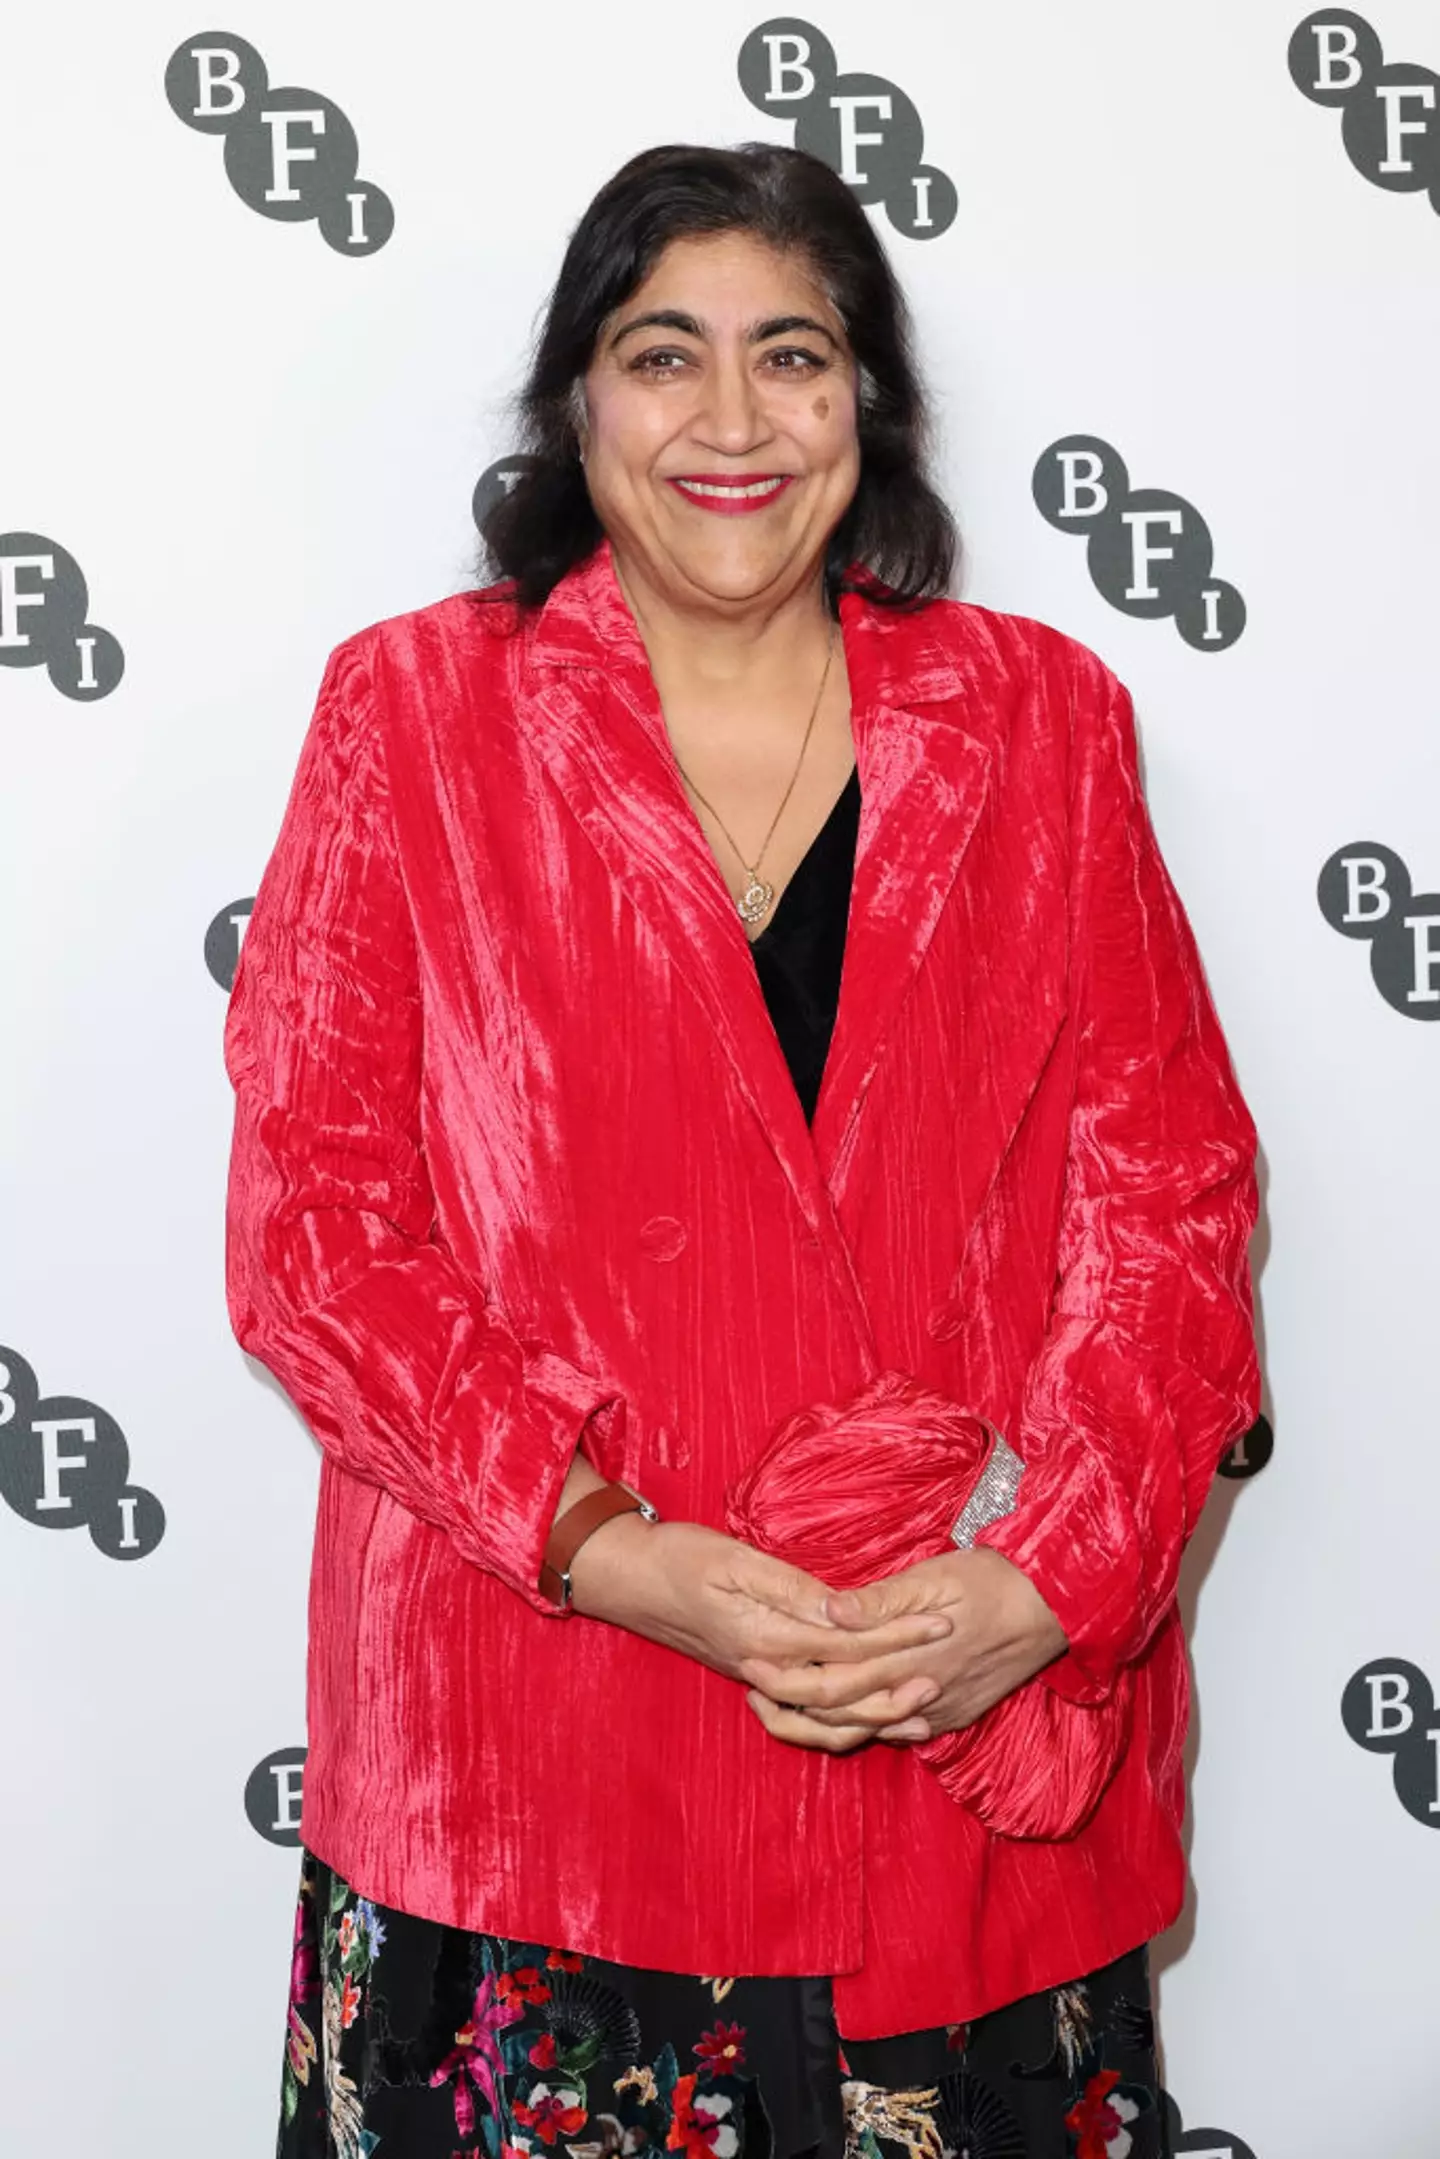 Award-winning director, Gurinder Chadha, opened up about casting the actor for his breakthrough role.